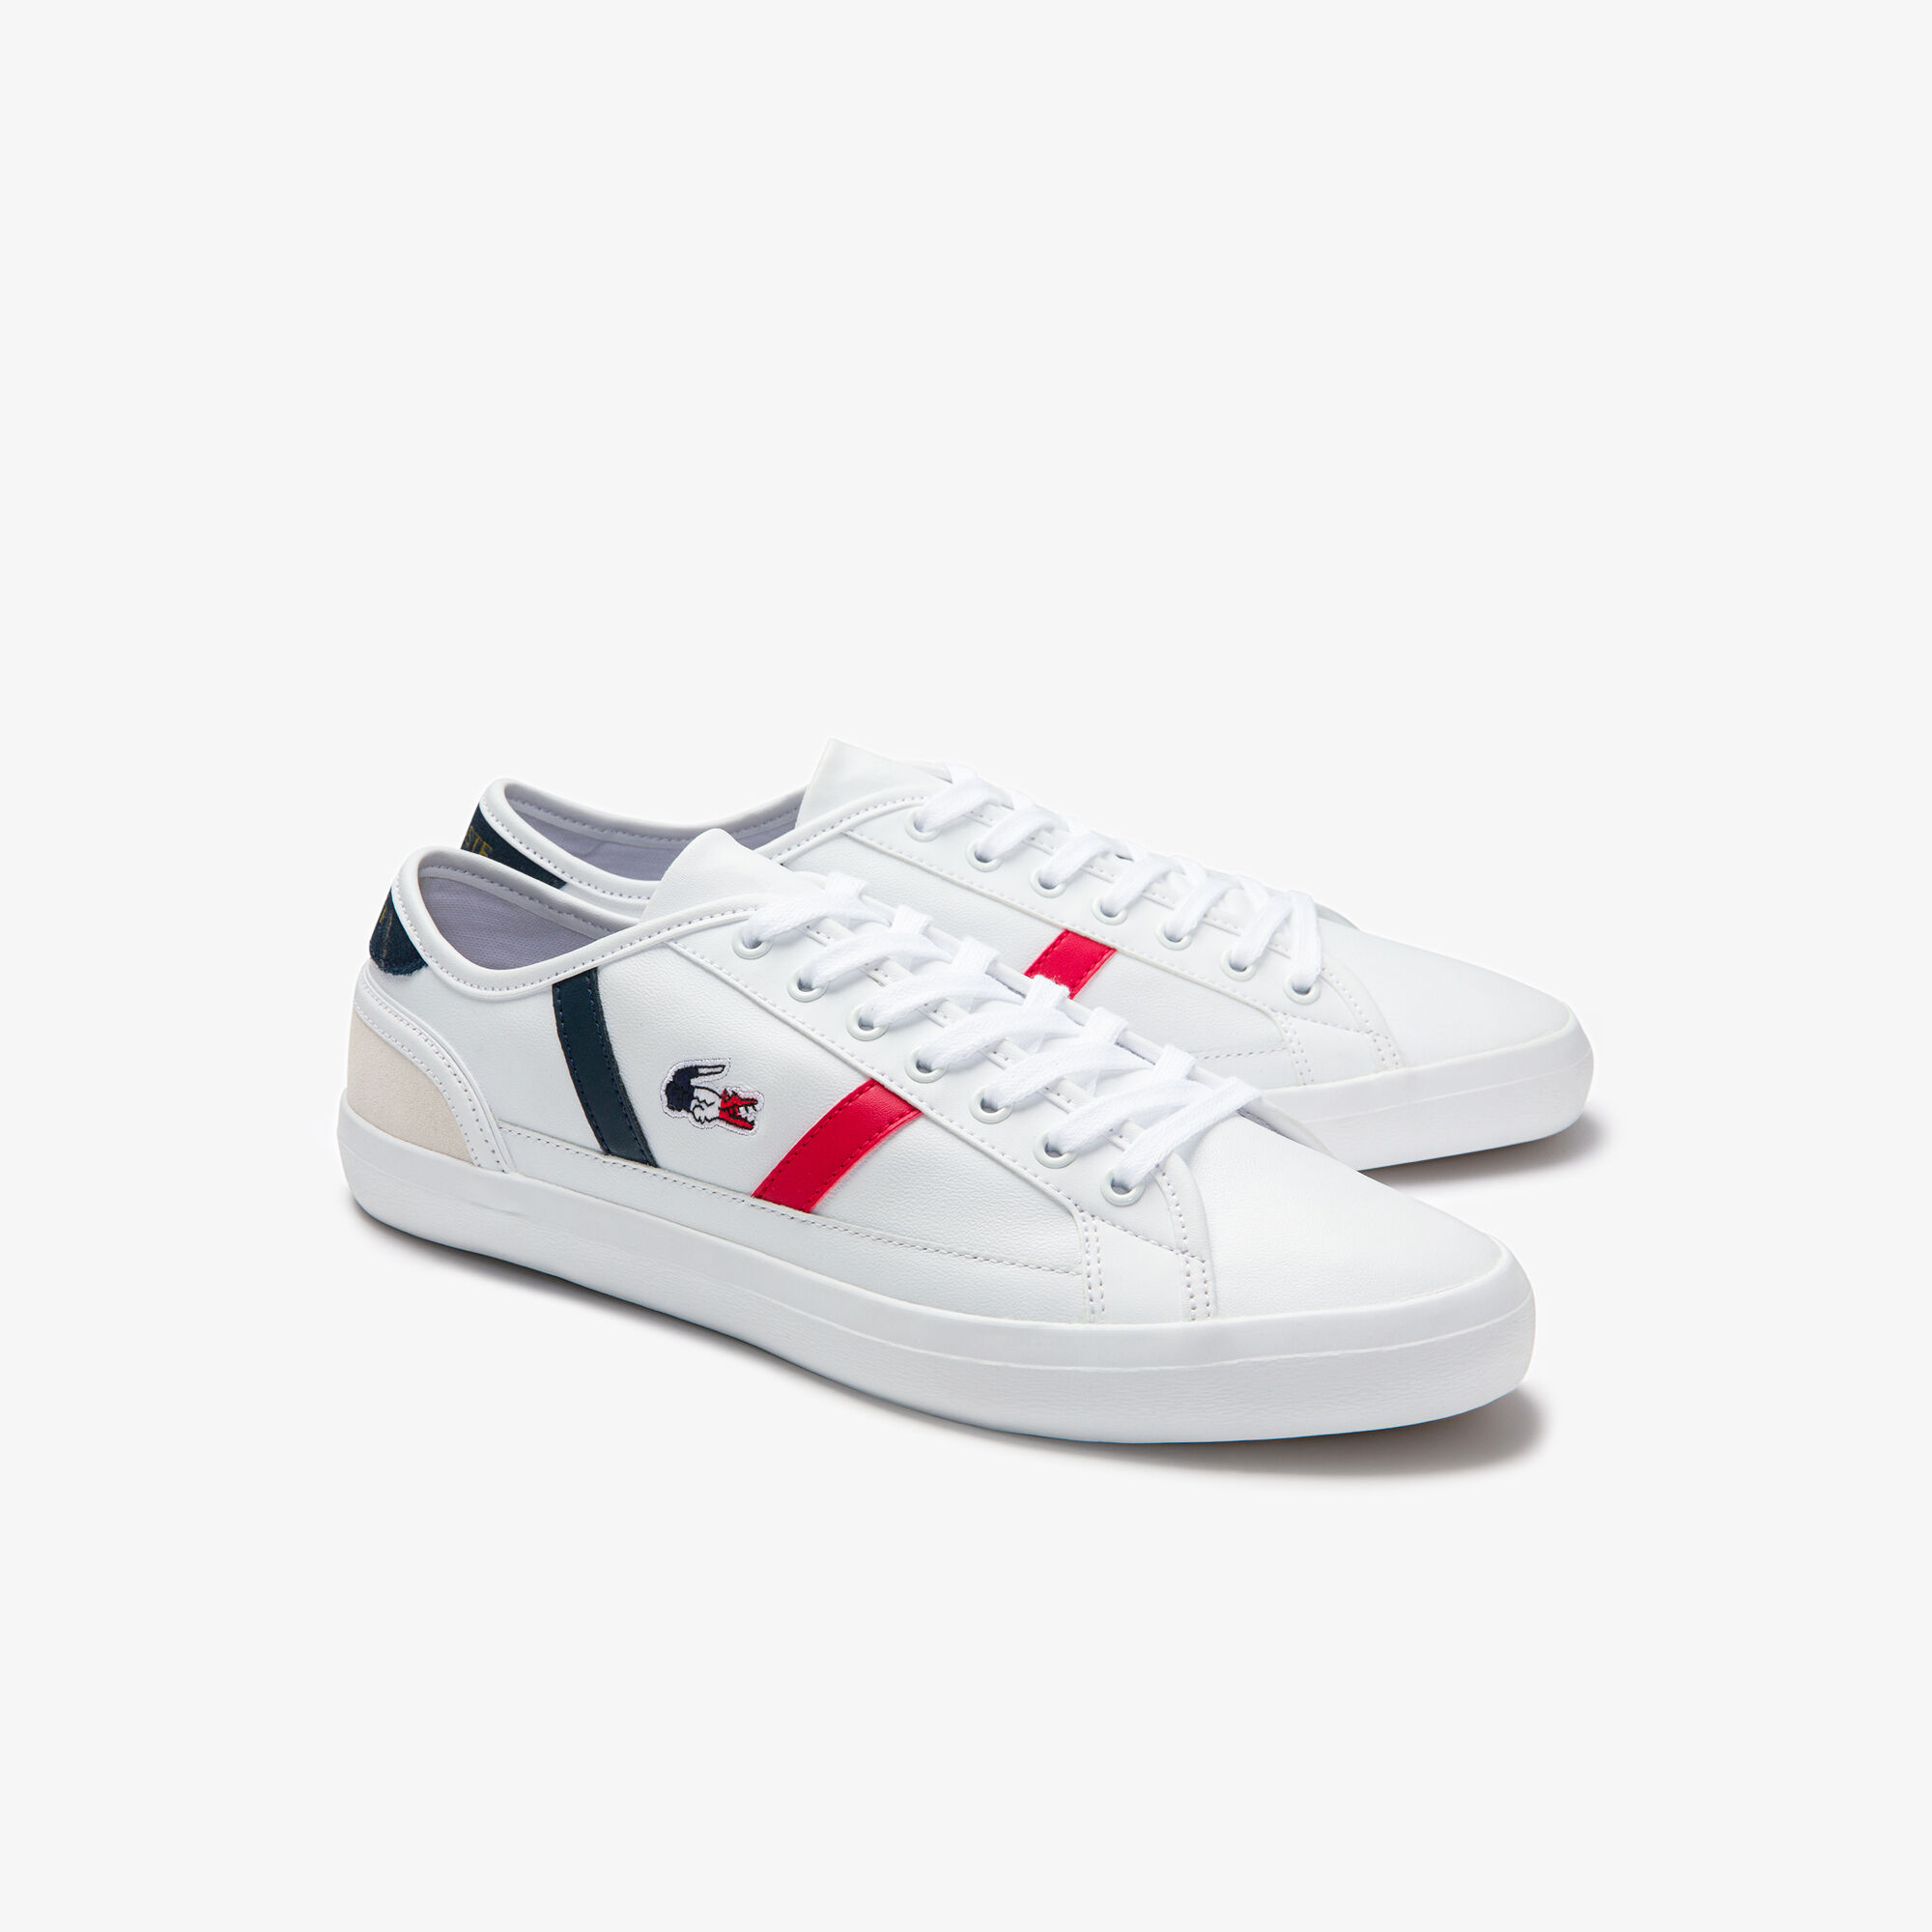 Men's Sideline Leather Tricolore Trainers